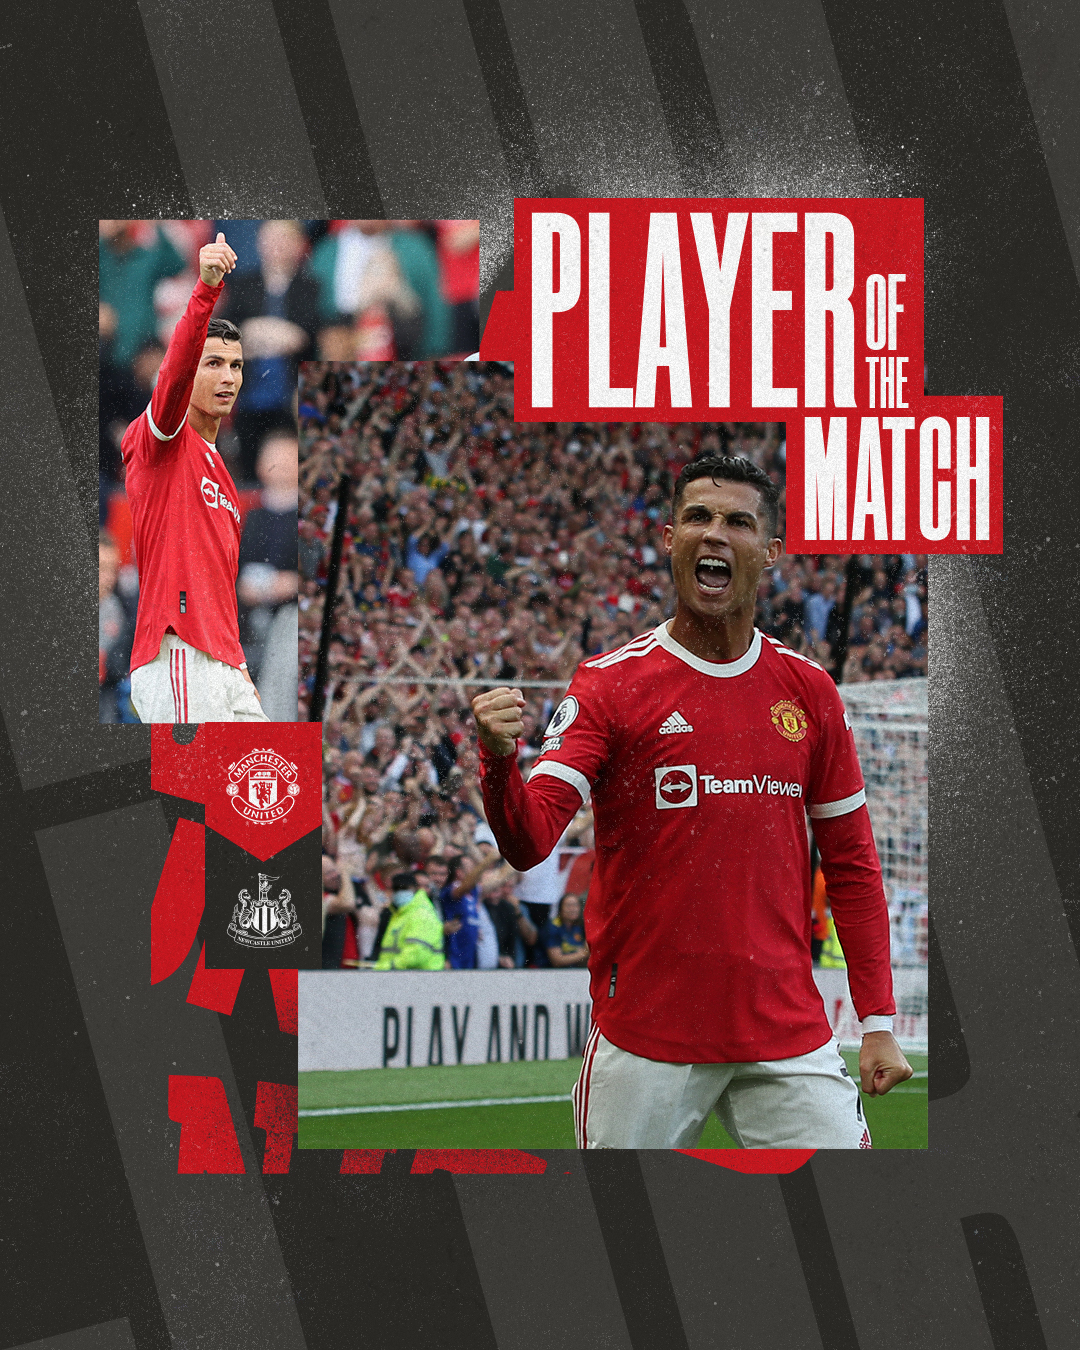 Manchester United on X: 𝗛𝗼𝗺𝗲𝗰𝗼𝗺𝗶𝗻𝗴 = 𝗰𝗼𝗺𝗽𝗹𝗲𝘁𝗲 ✔️ A  worthy winner of our Player of the Match award 🤩👏 #MUFC